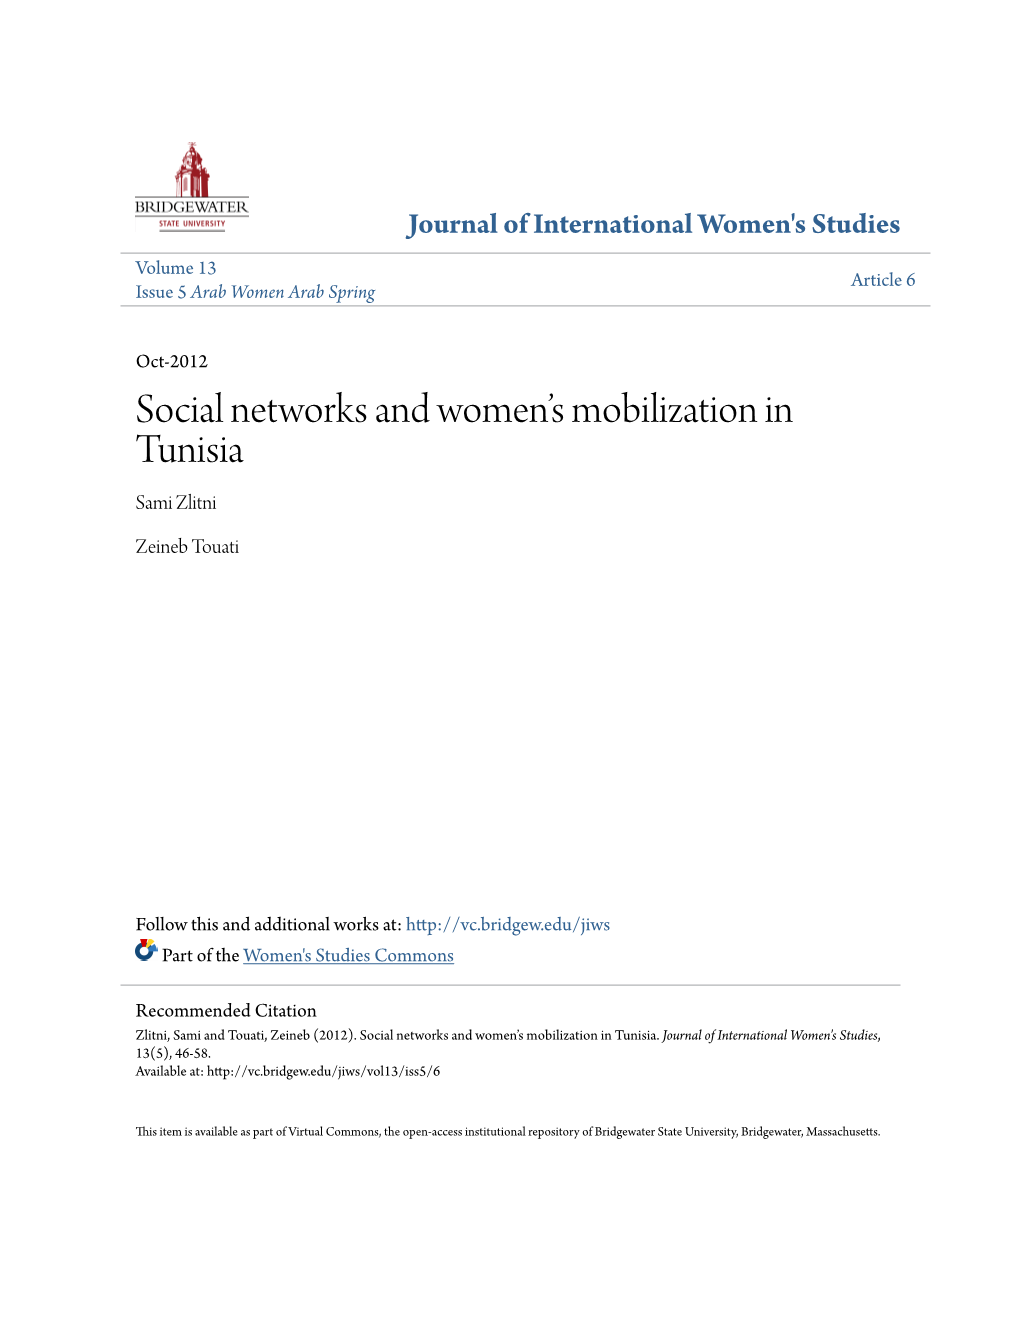 Social Networks and Women's Mobilization in Tunisia